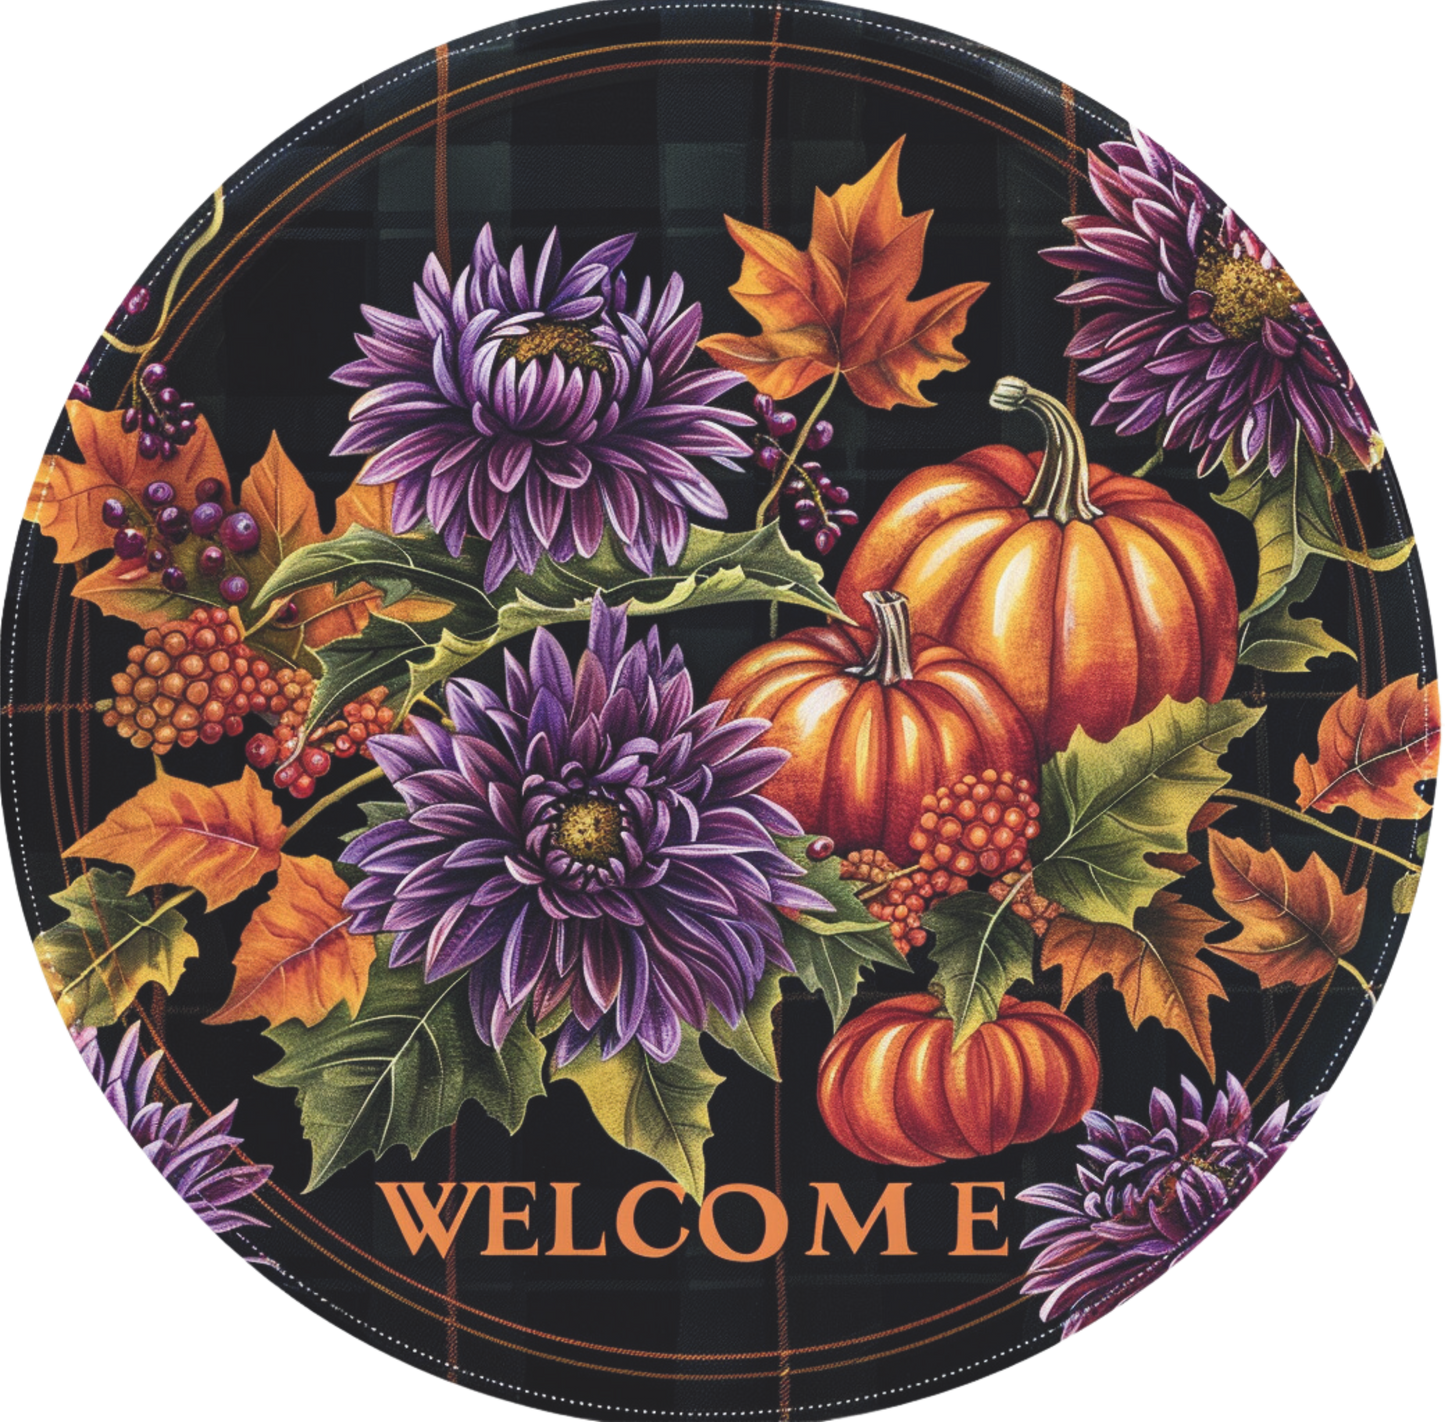 Welcome black plaid with pumpkins Sign Round